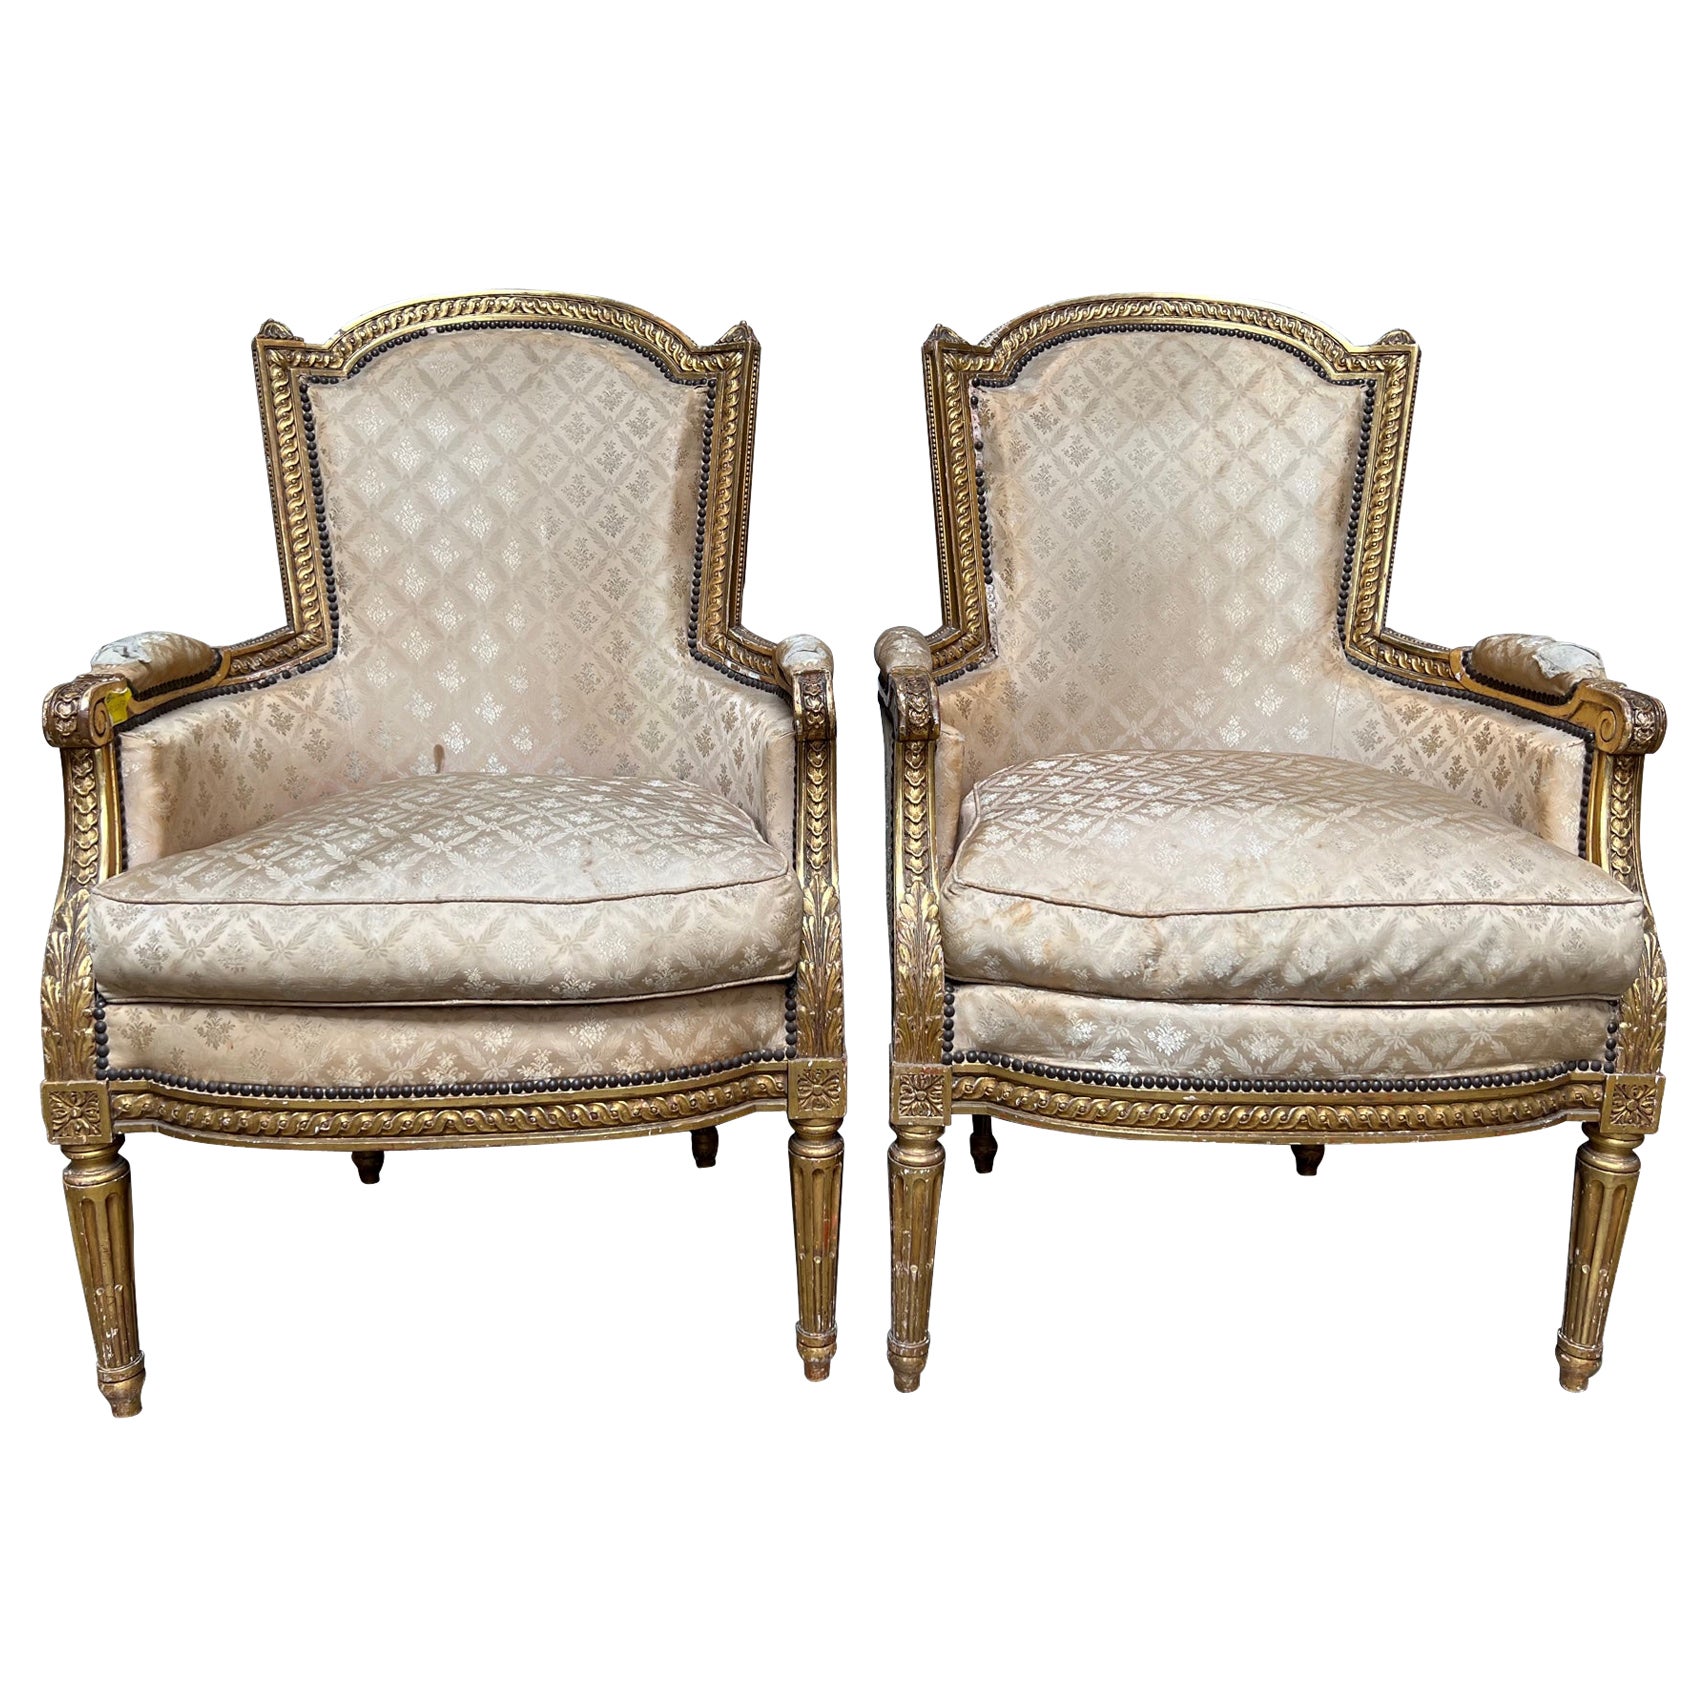 Pair of French Louis XIV Style Gilt Wood Bergeres